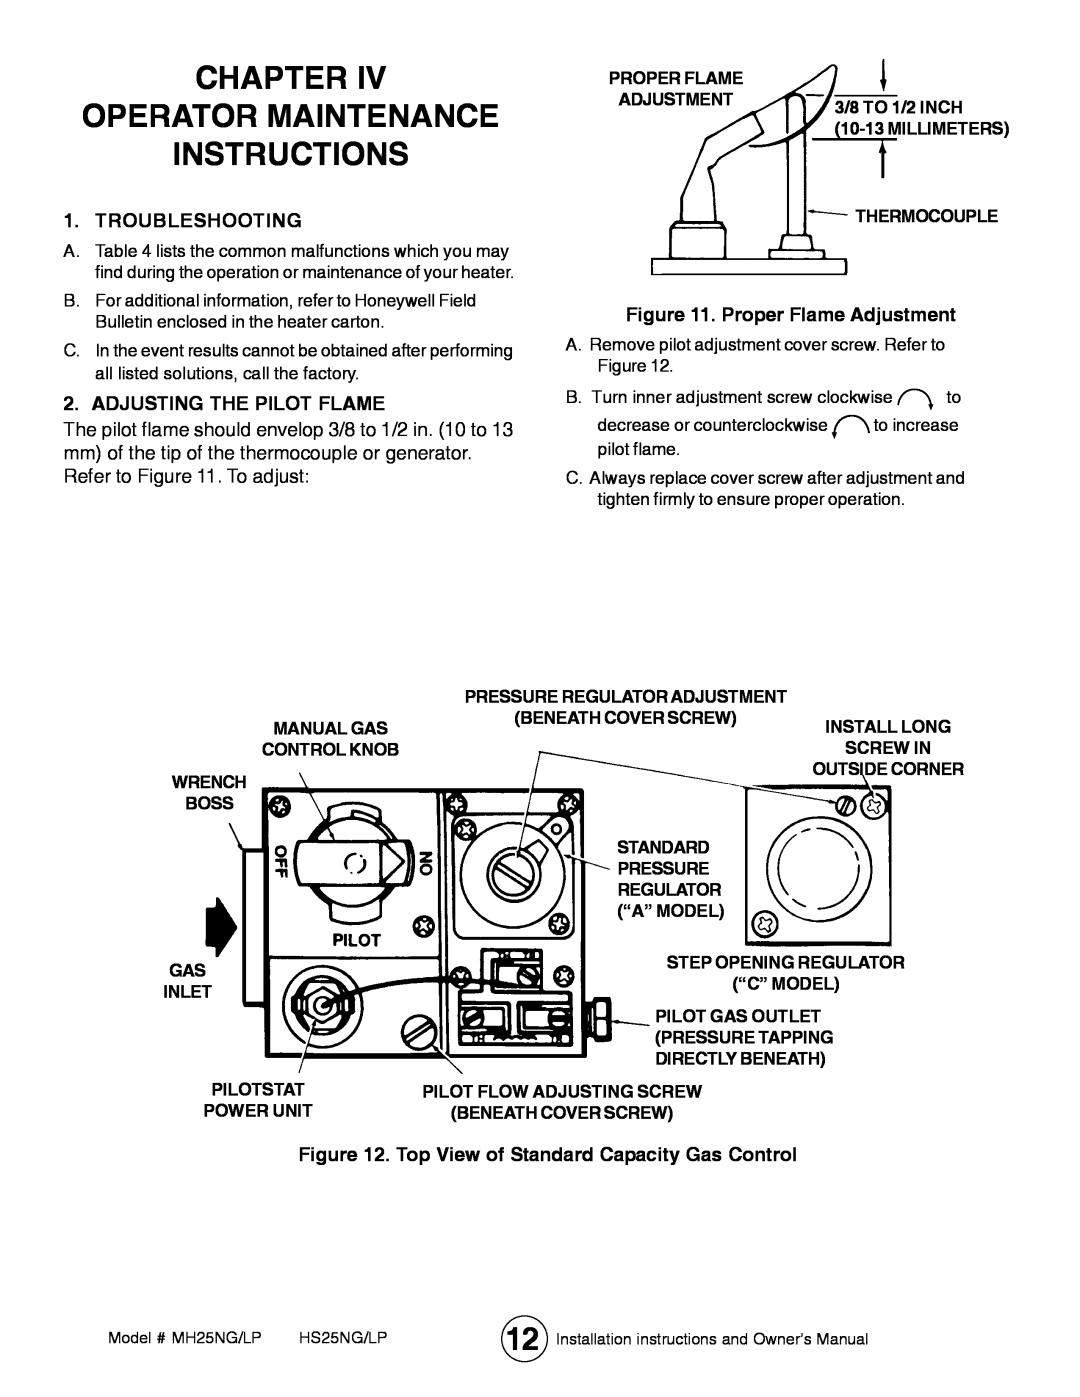 Mr. Heater MH25LP / MH25NG Chapter Operator Maintenance Instructions, Troubleshooting, Adjusting The Pilot Flame 